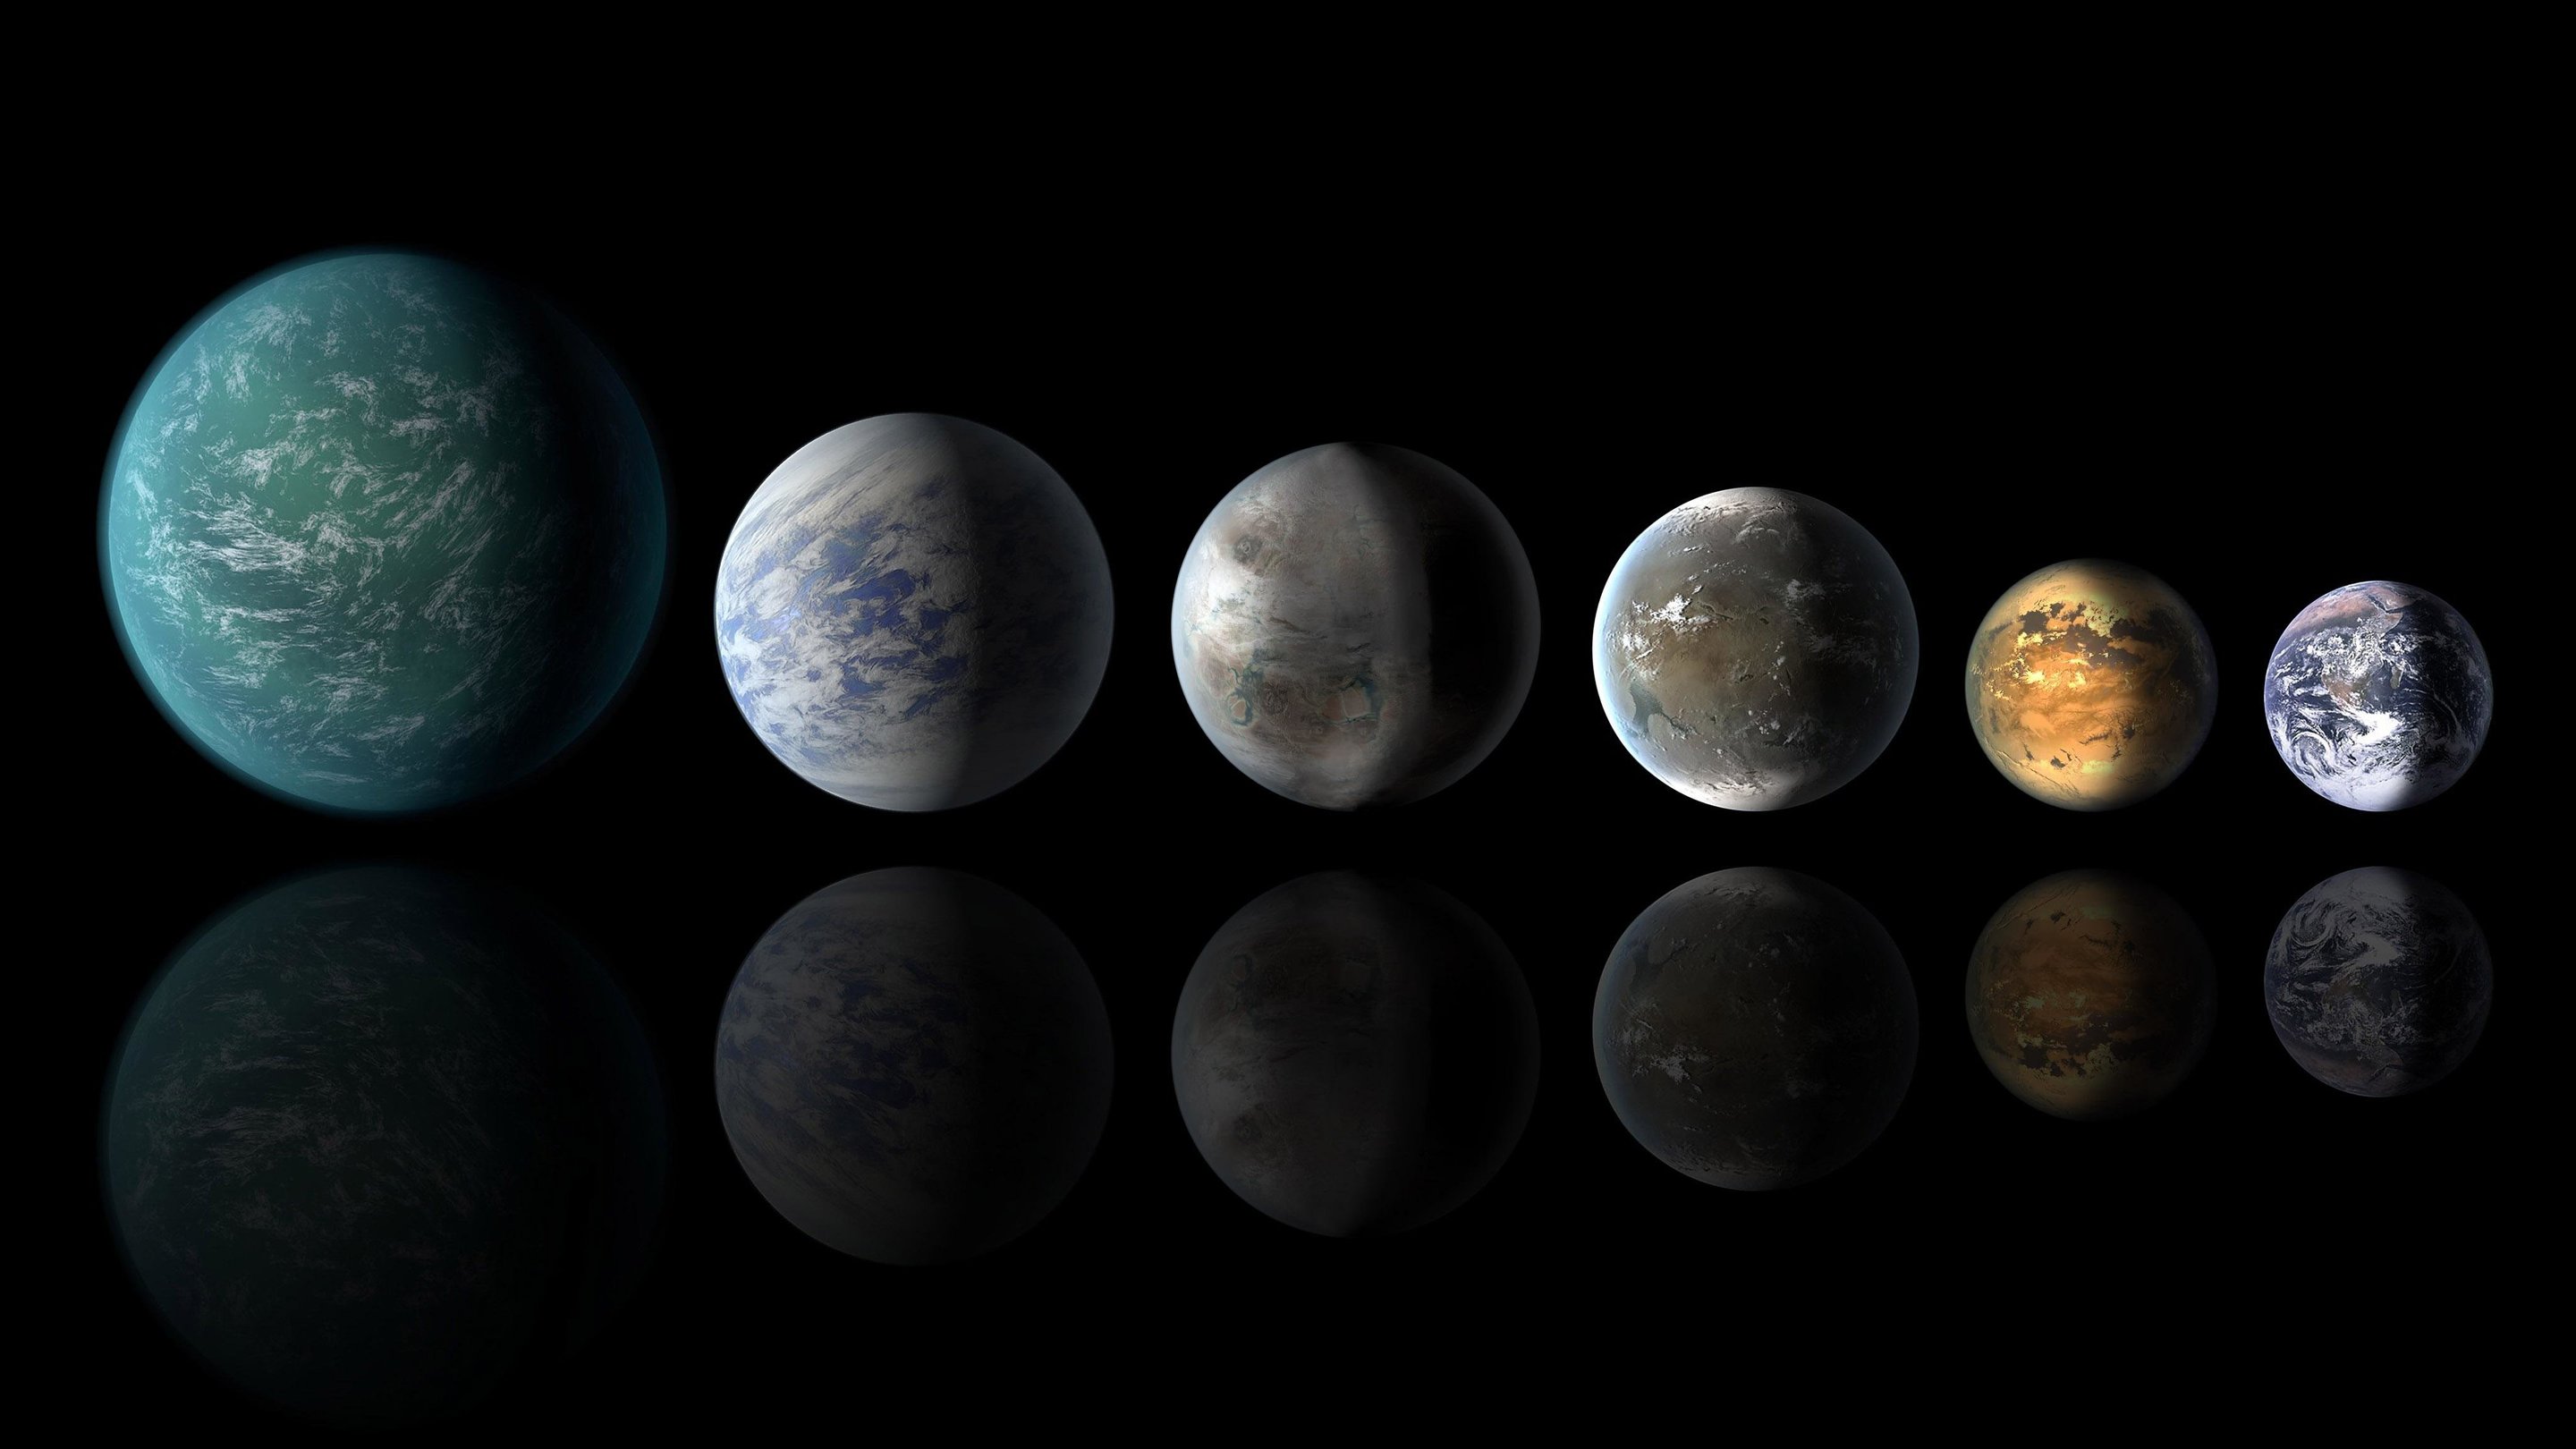 Water worlds were not all that rare